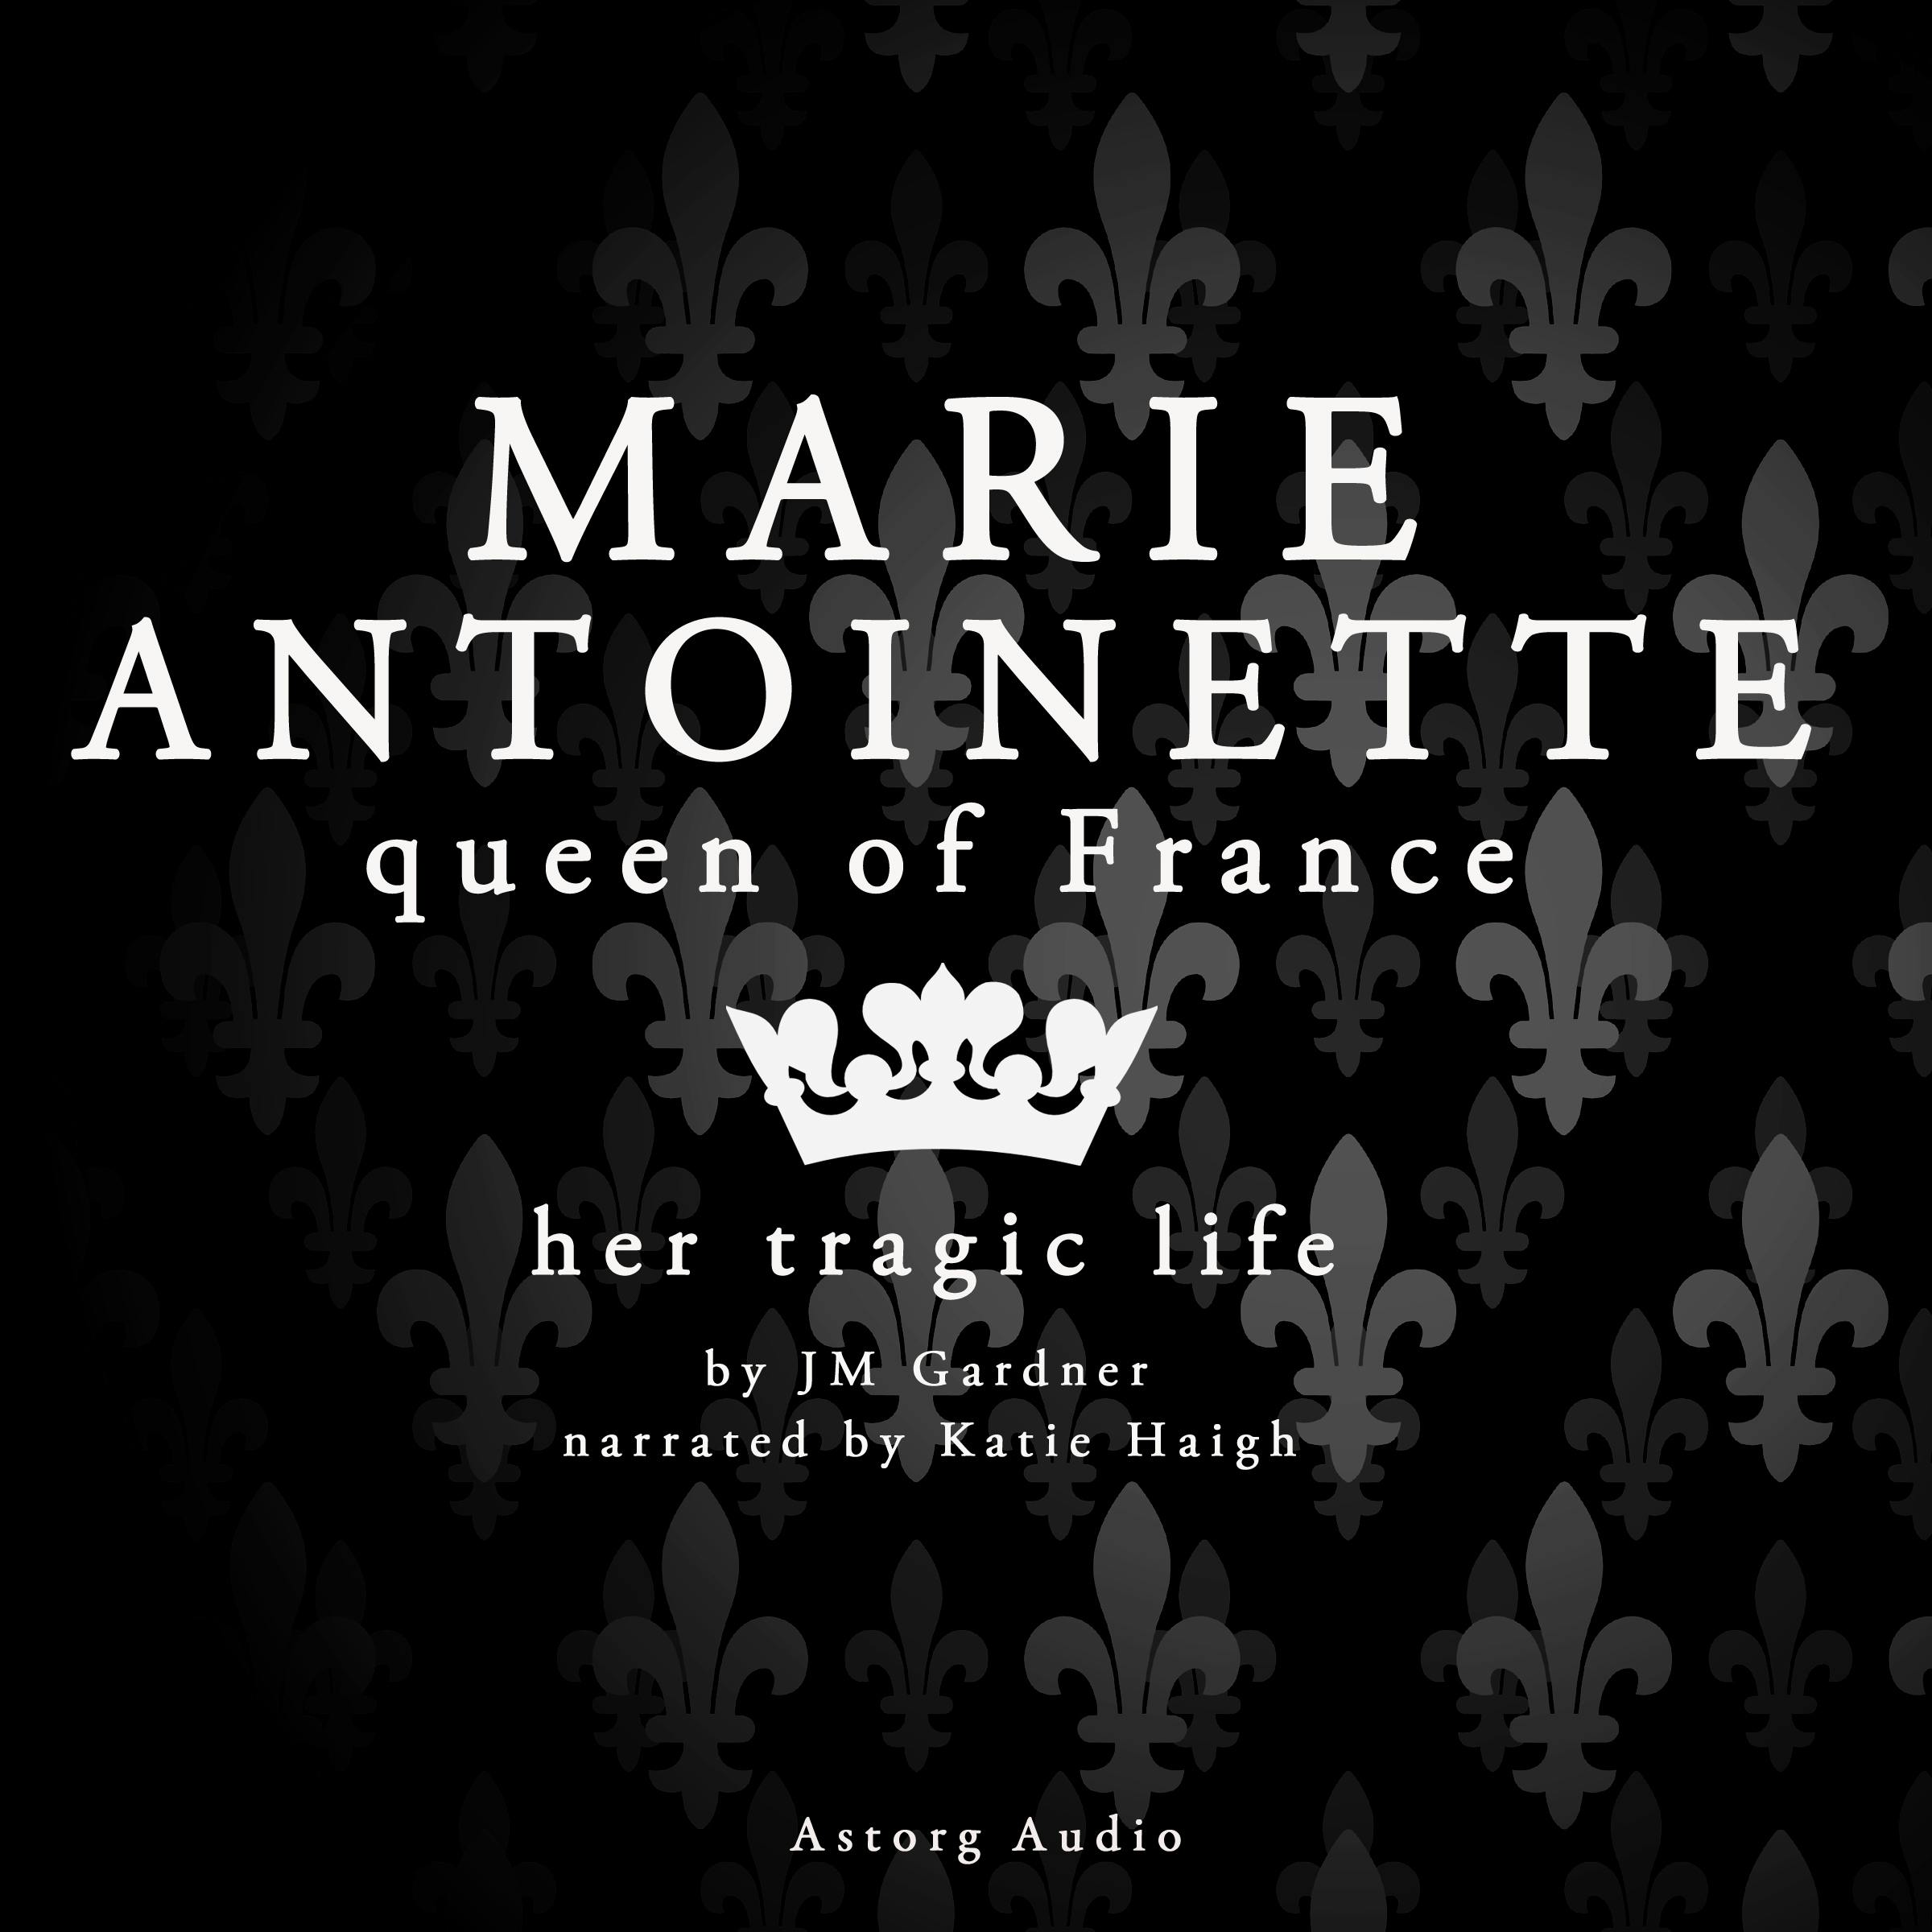 Marie Antoinette, Queen of France: History of France - undefined